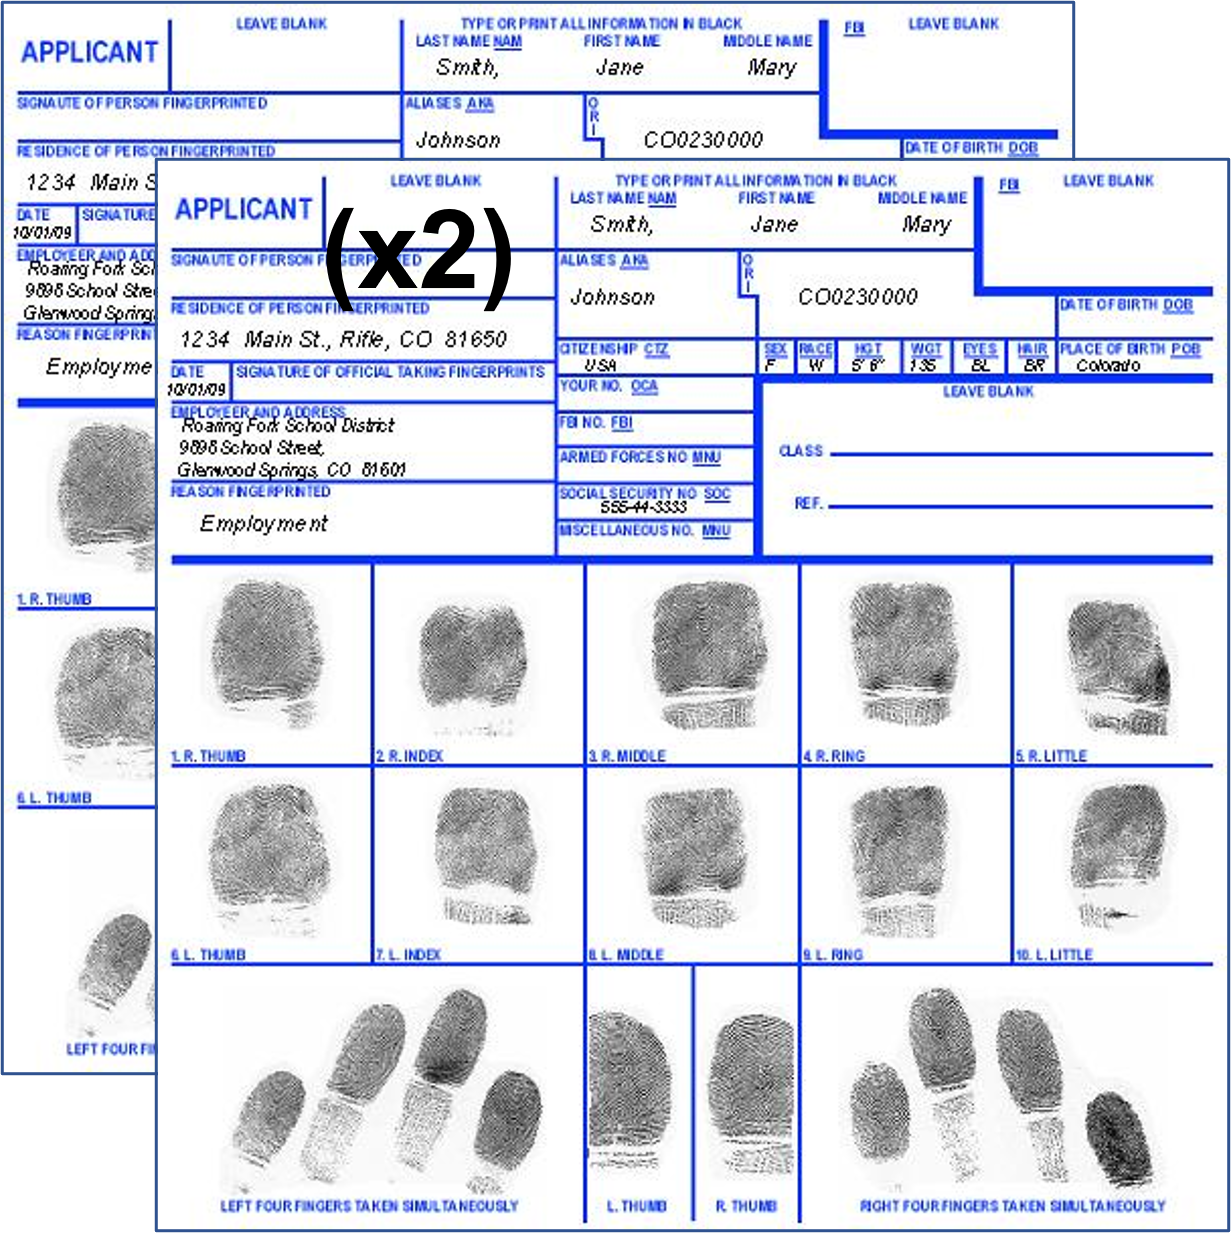 Ink Fingerprinting On FD 258 More Colorado Springs CO The Mail 